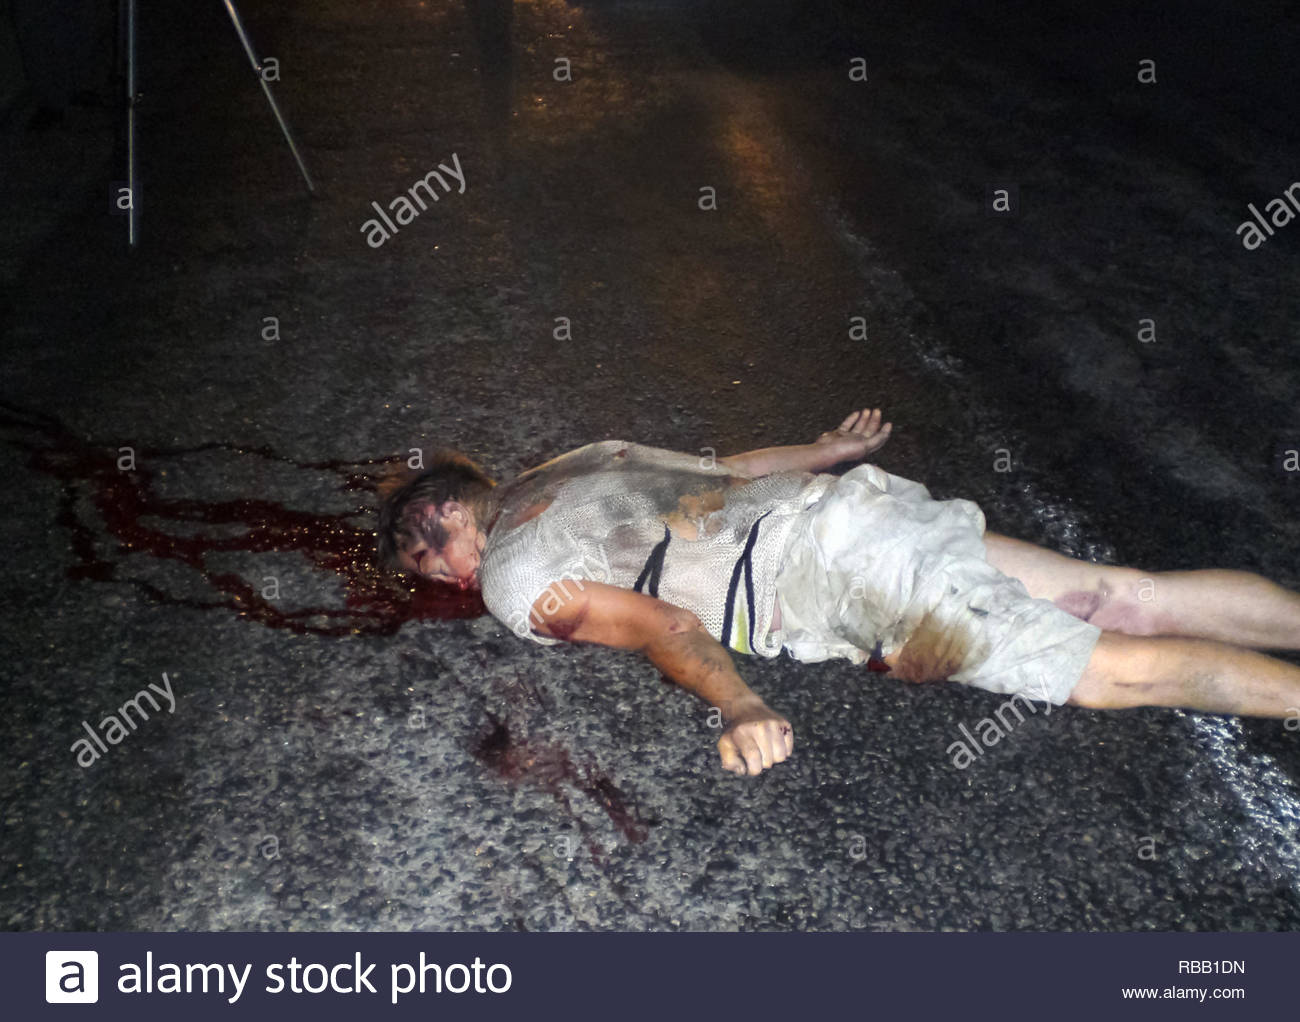 kharkov-ukraine-june-14-2010-the-dead-person-as-a-result-of-a-car-accident-the-corpse-of-a-person-consequences-of-a-car-accident-a-wrecked-car-RBB1DN.jpg